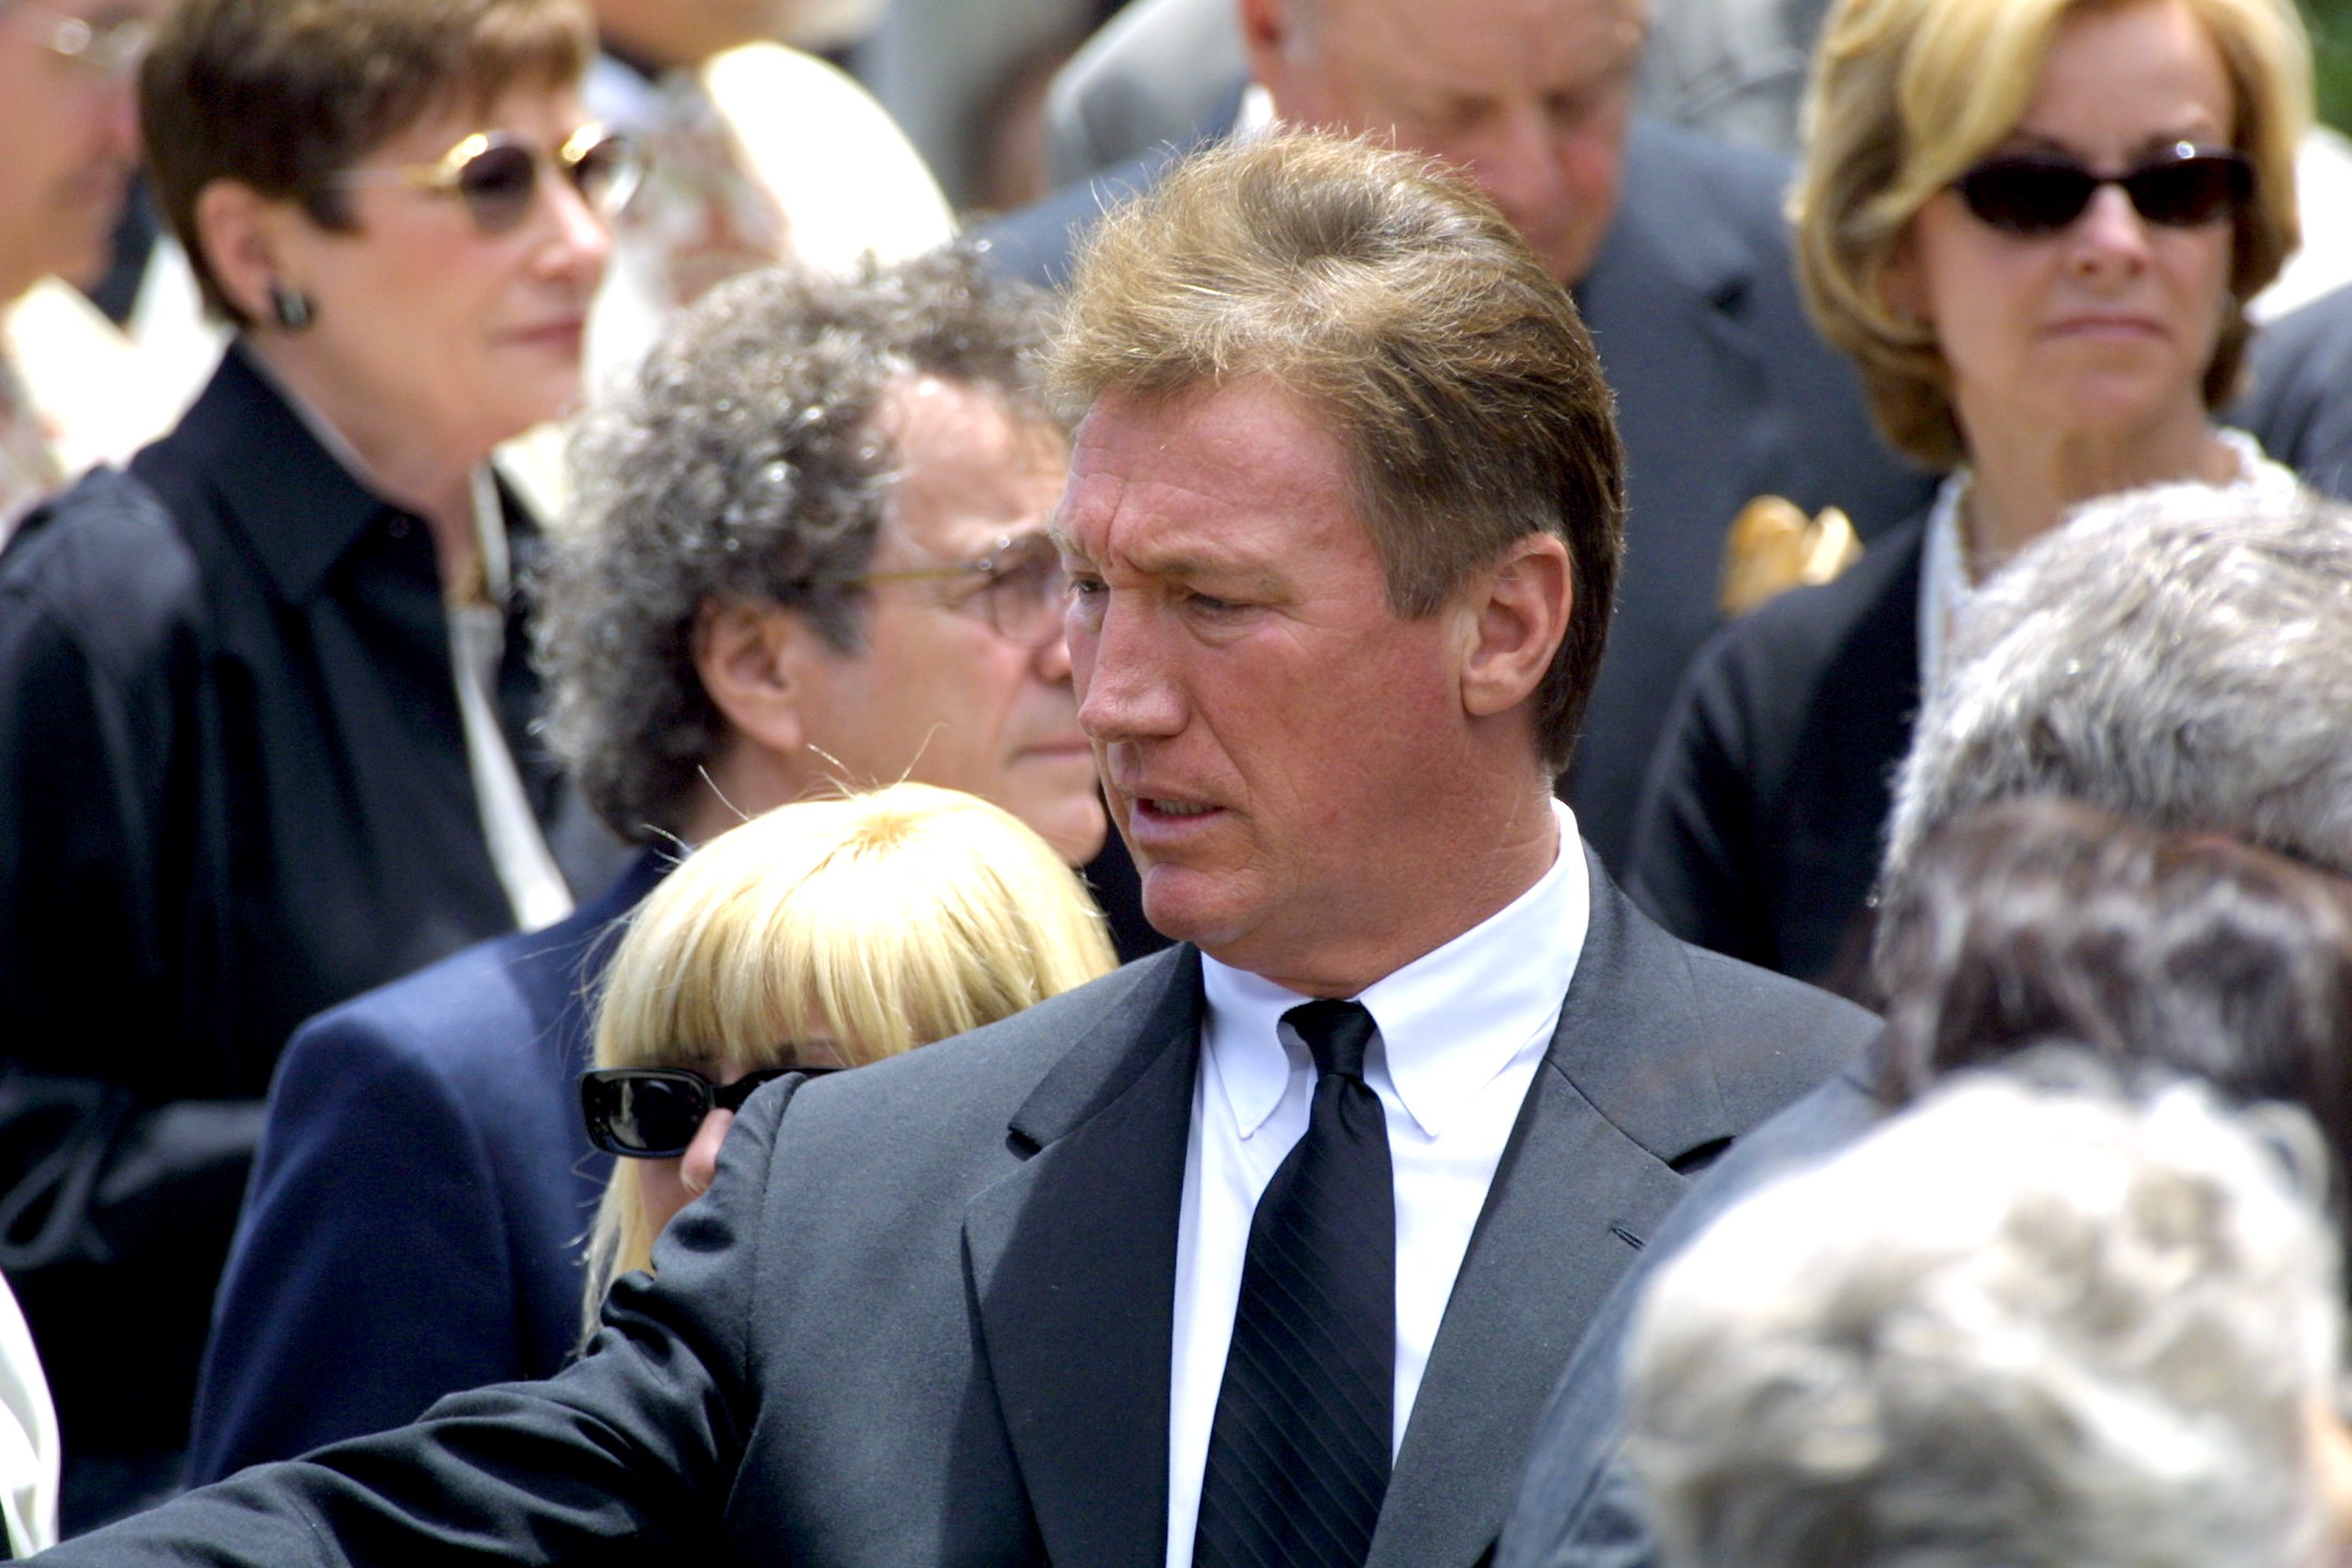 Alan Autry at the funeral of Carroll O'Connor at St. Paul The Apostle Church in West Los Angeles, CA, on June 26, 2001 | Source: Getty Images